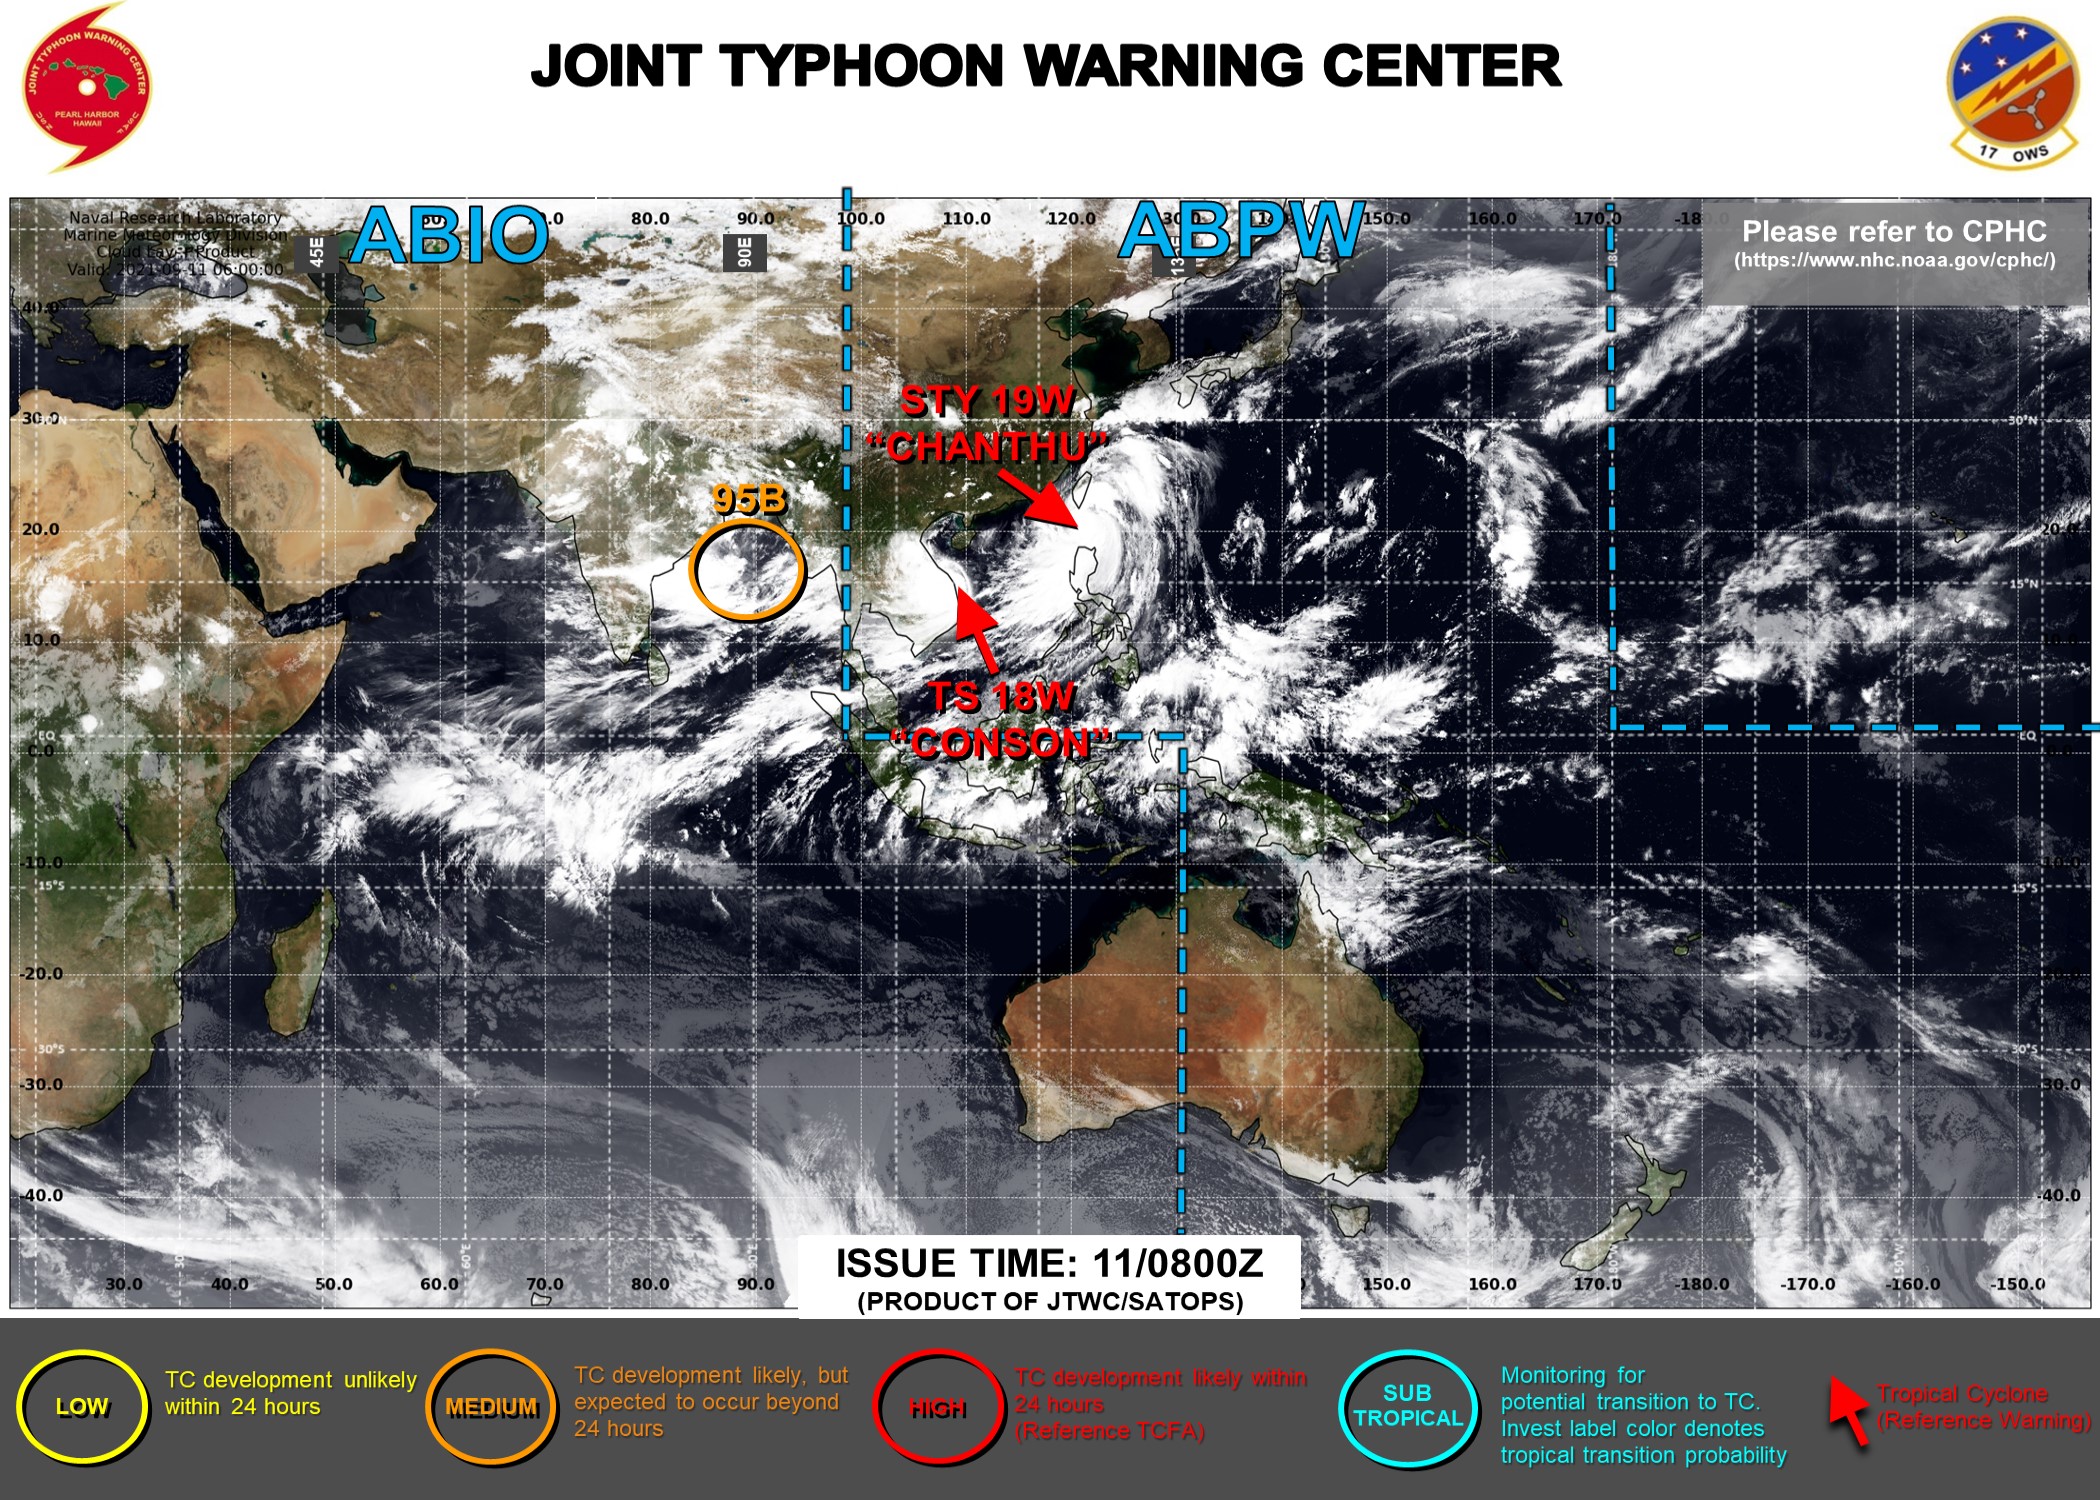 JTWC ARE ISSUING 6HOURLY WARNINGS AND 3HOURLY SATELLITE BULLETINS ON 18W AND 19W. A TROPICAL CYCLONE FORMATION ALERT WAS ISSUED FOR 96W AT 10/17UTC AND HAS BEEN CANCELLED AT 11/07UTC. 95B IS NOW A ON THE MAP(10/18UTC) AS MEDIUM.